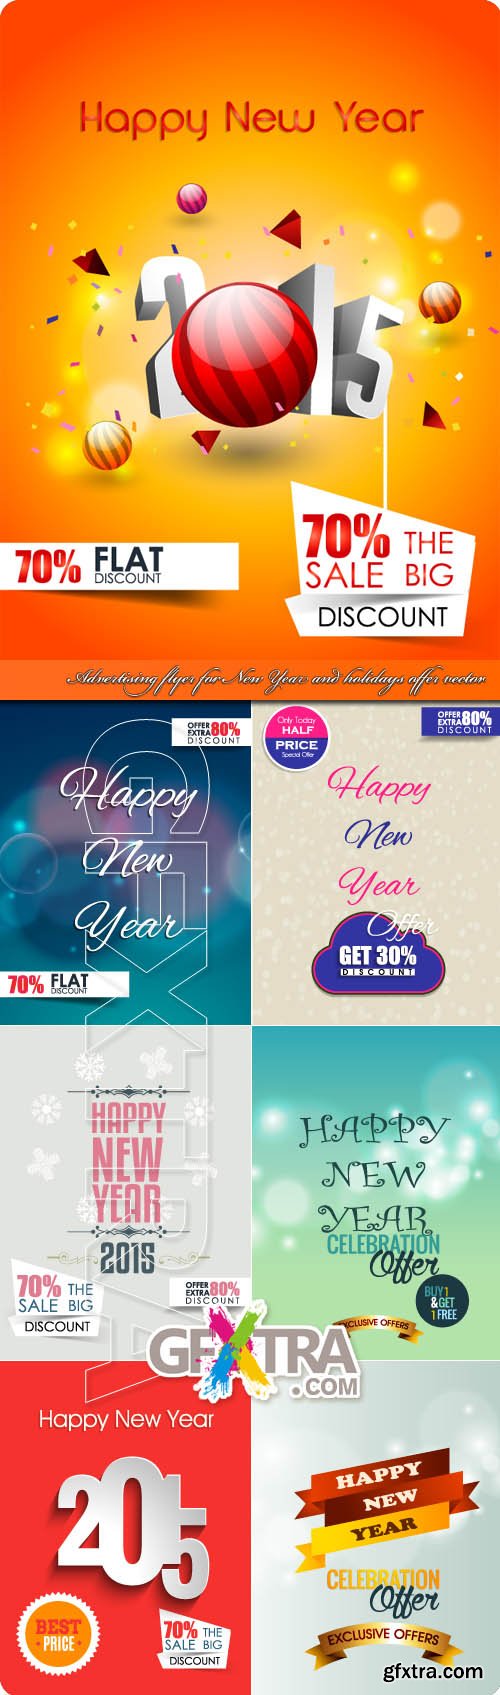 Advertising flyer for New Year and holidays offer vector